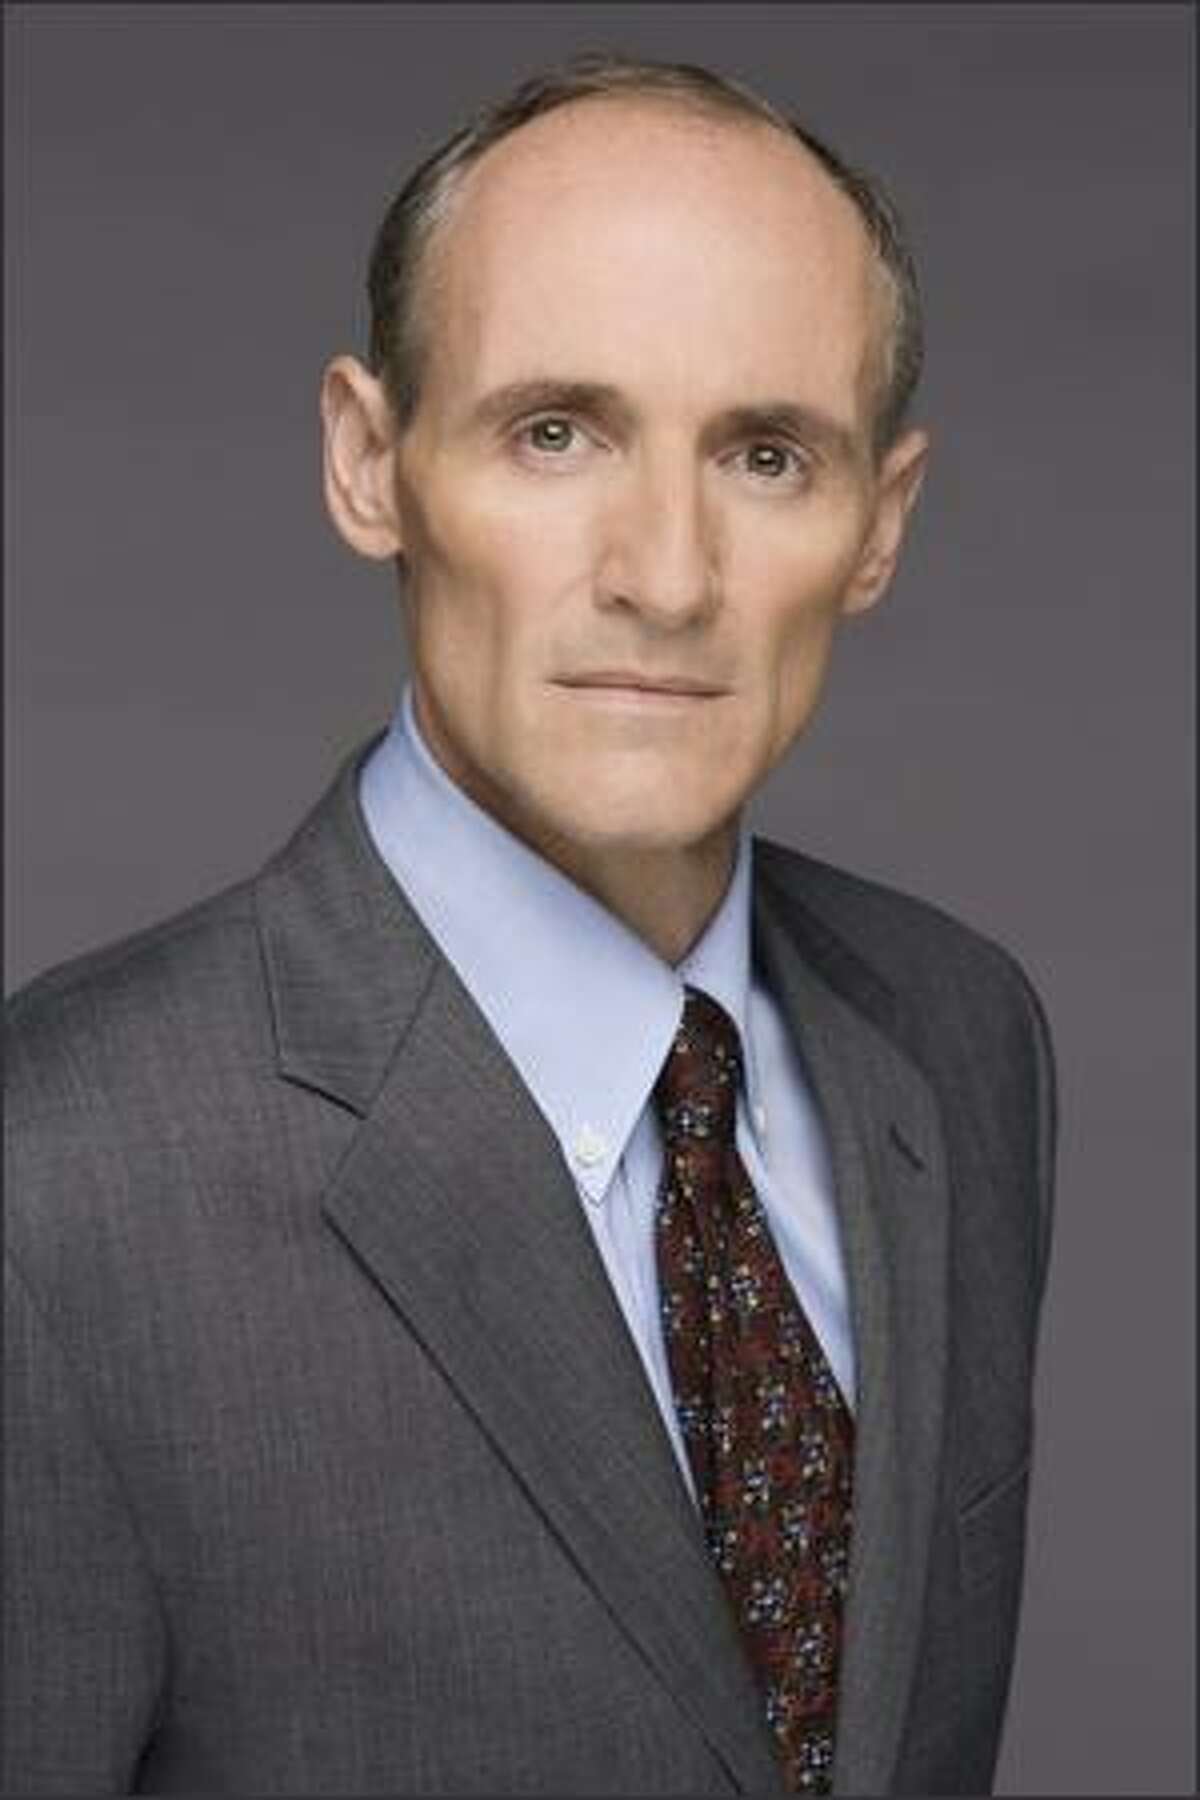 Colm Feore as Henry Taylor. The clock is ticking for "24: Season 7" to premiere with a special two-night, four-hour event on Sunday and Monday.